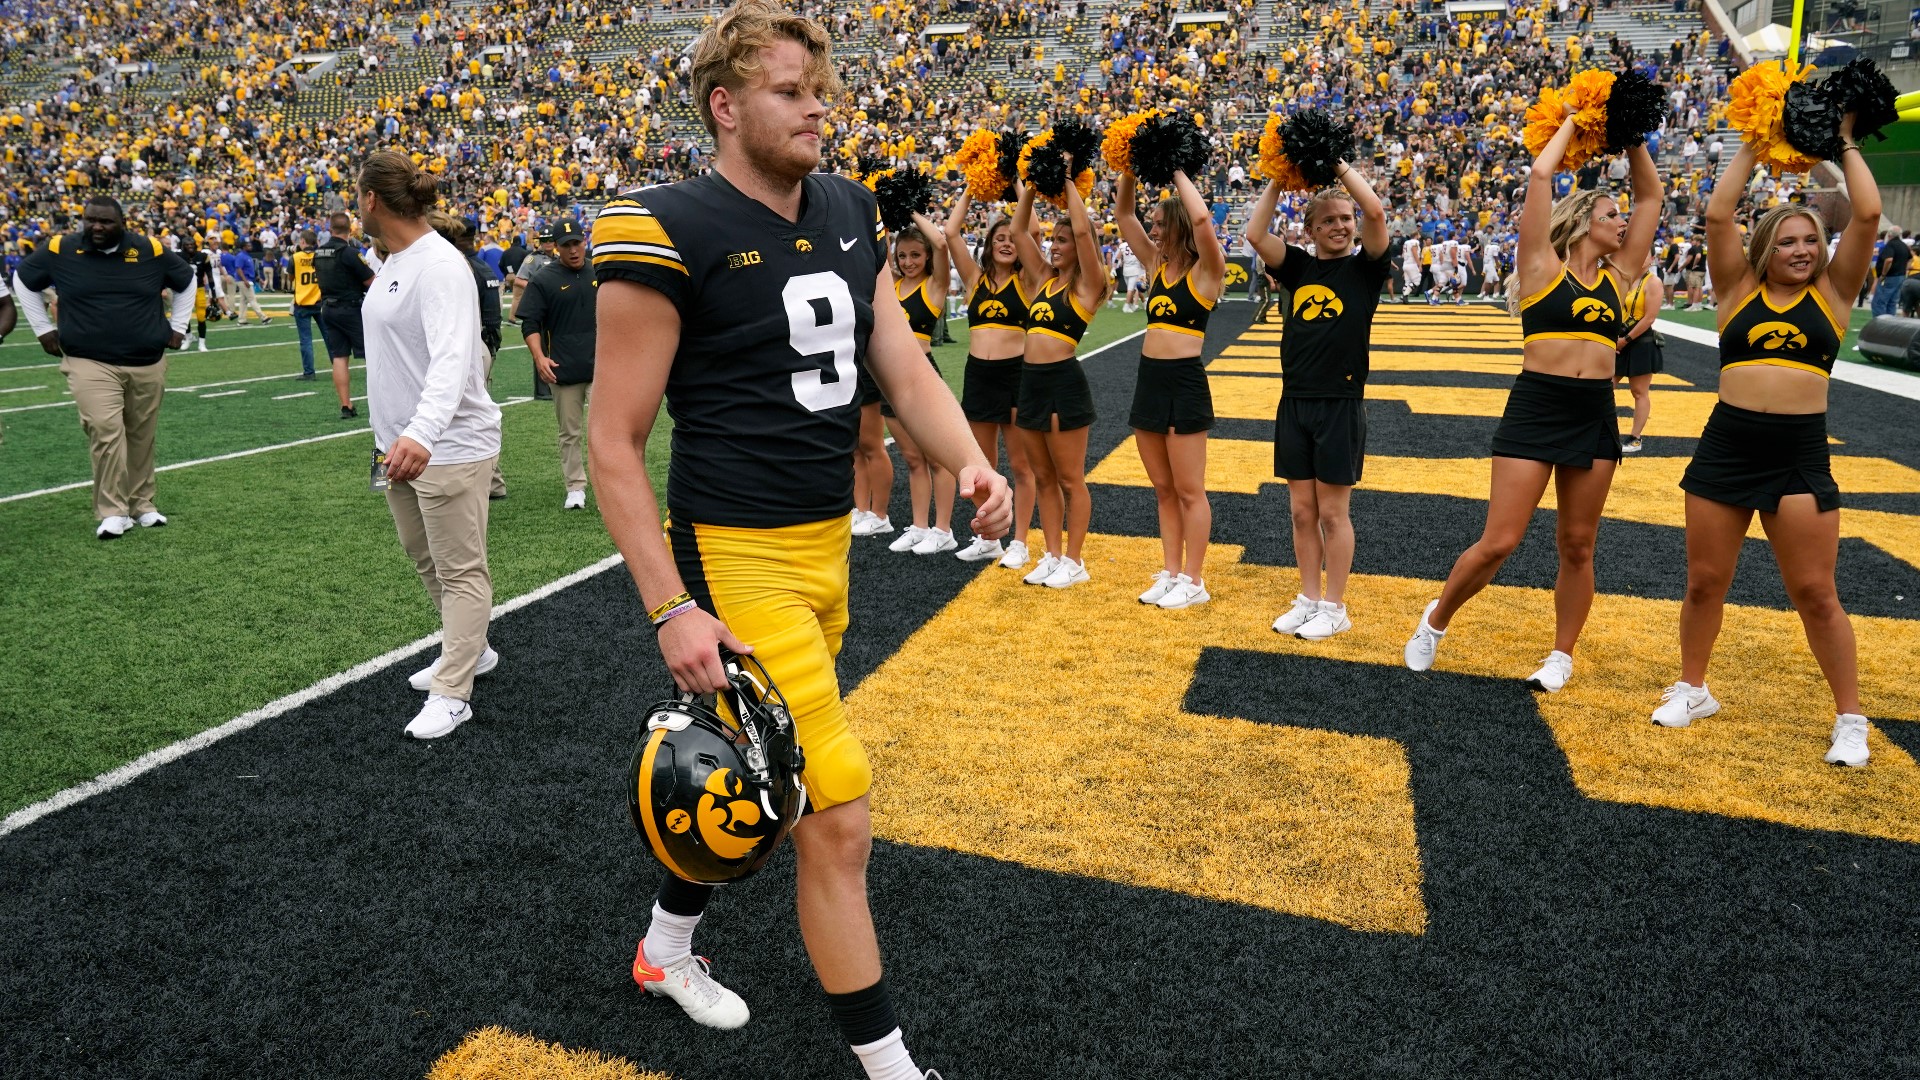 Tory Taylor, the Australian punter who became an Iowa Hawkeye, is looking to make it big in the NFL.